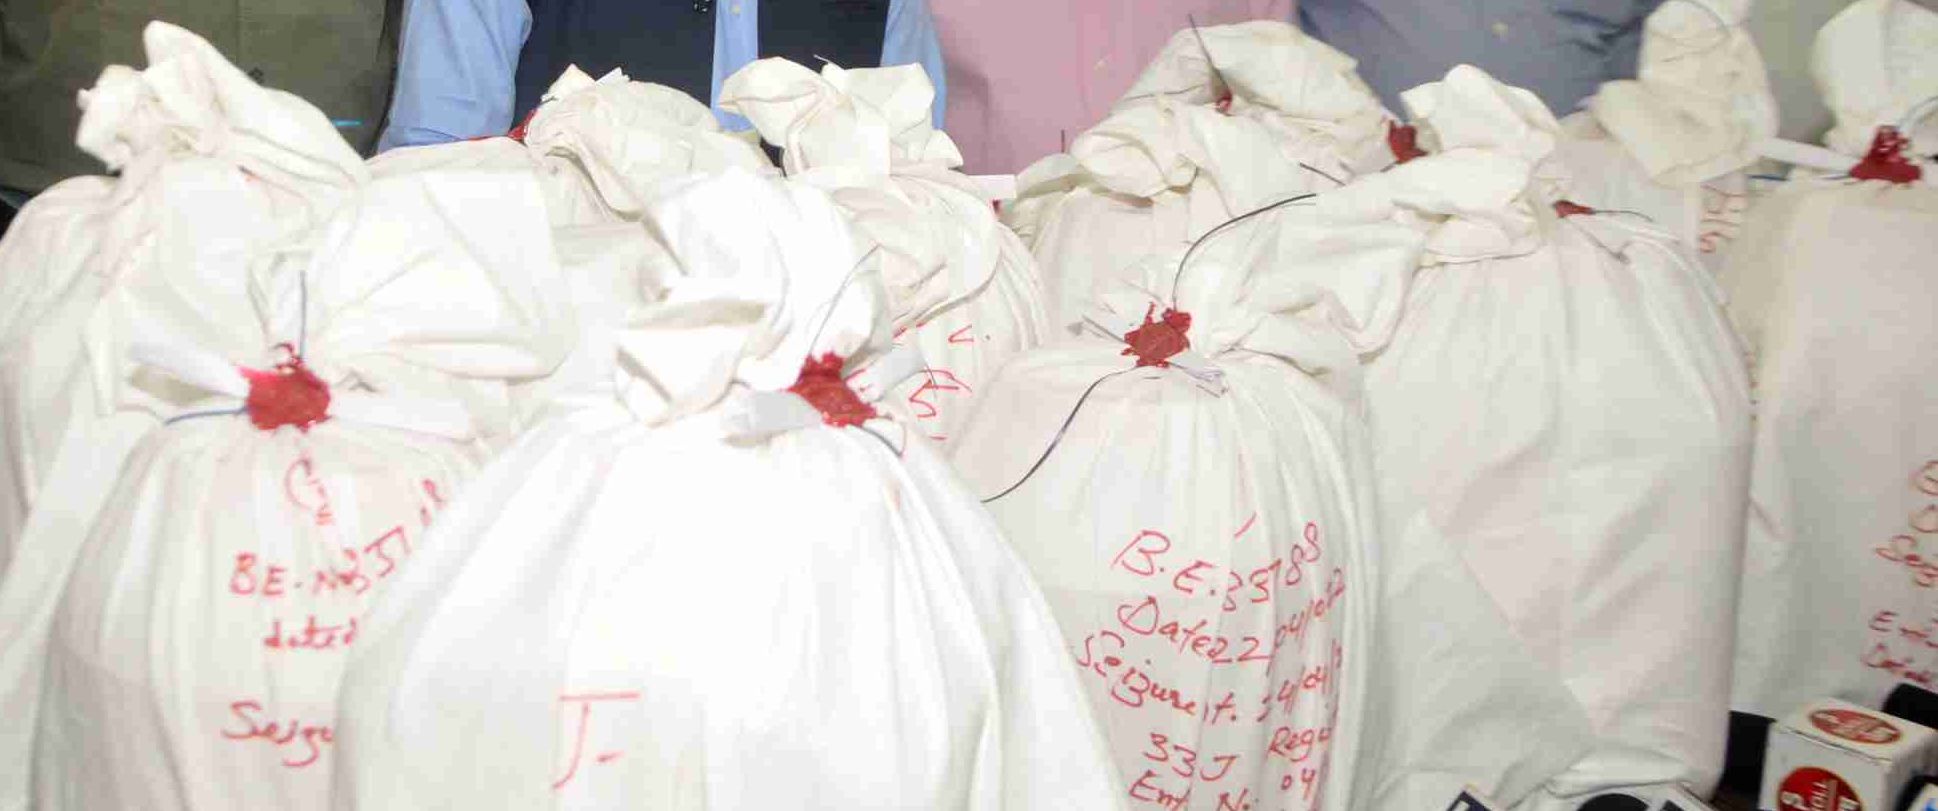 Rs 1,439-crore heroin seized from Gujarat port